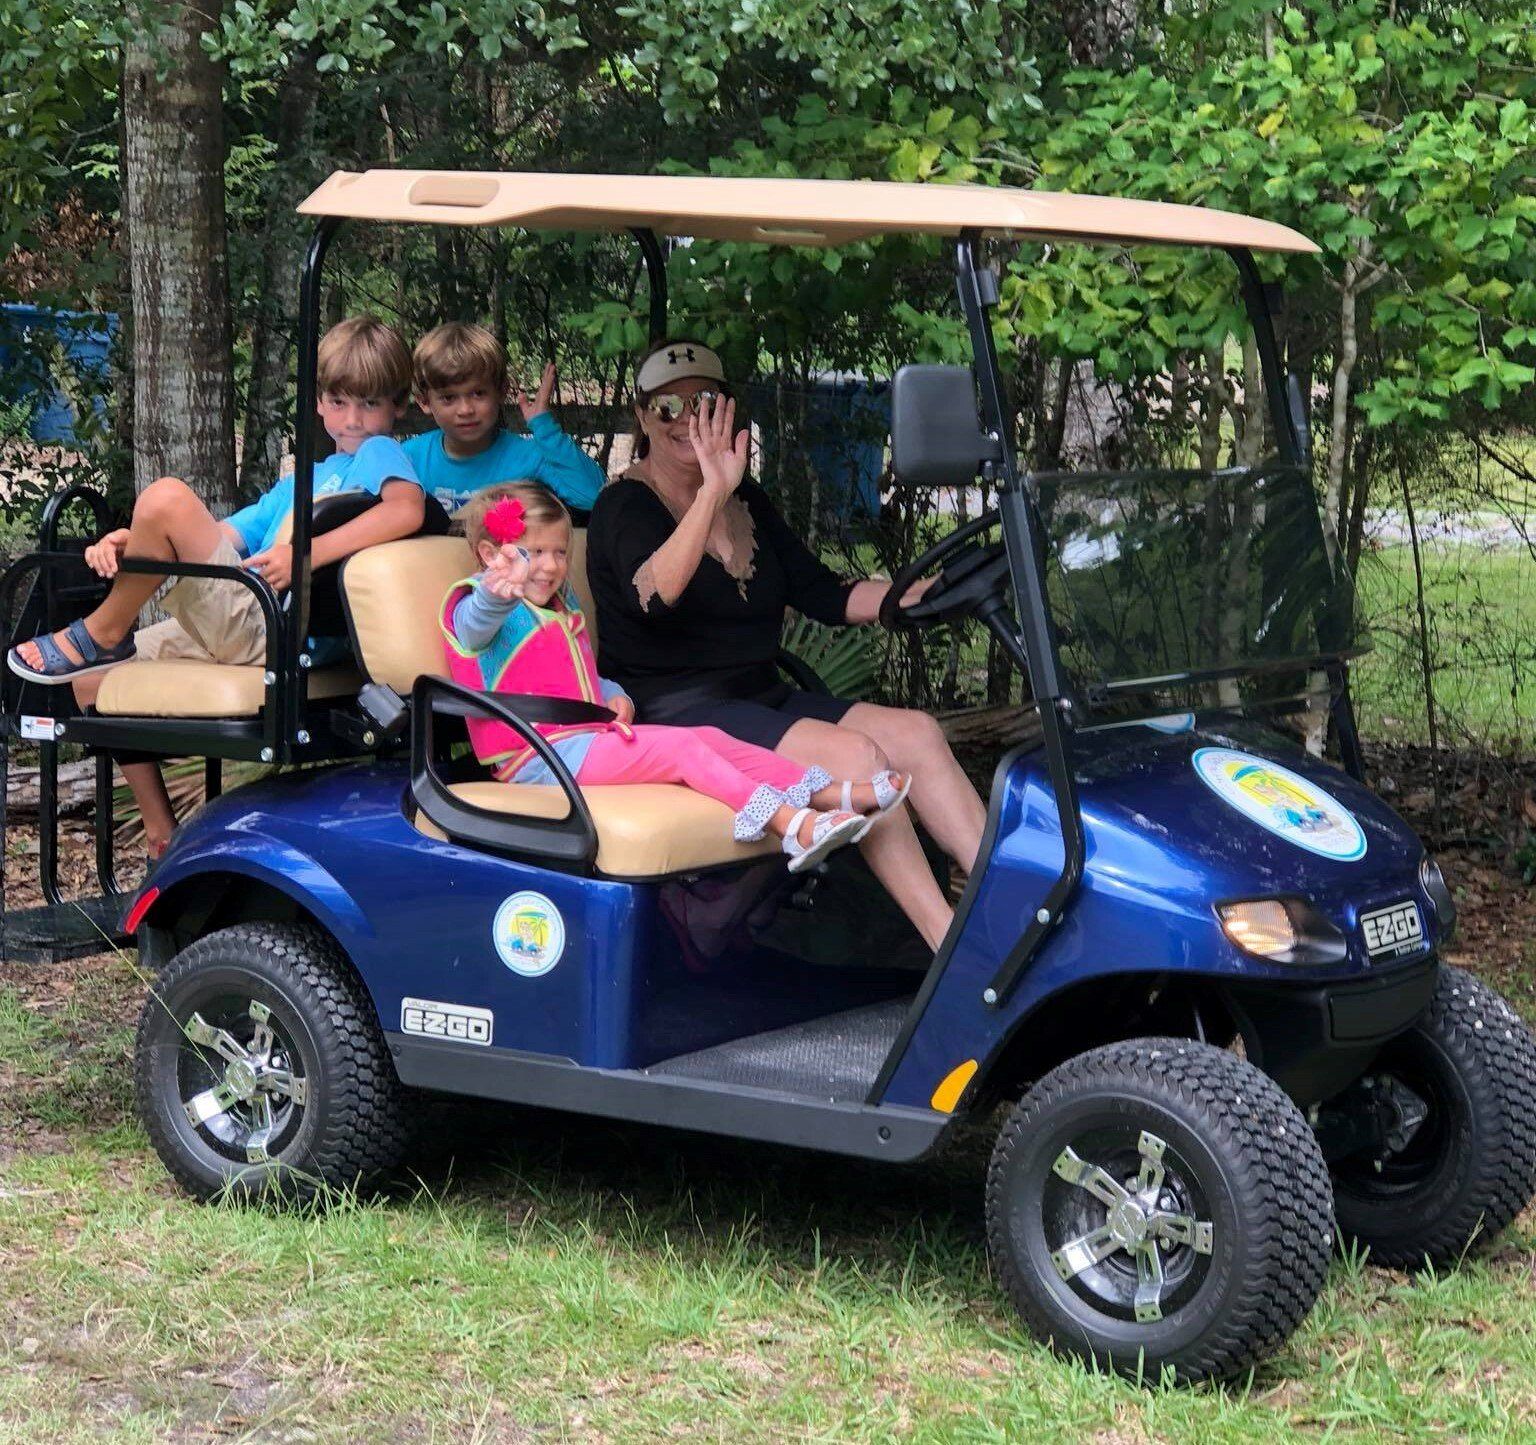 Foley studying golf cart expansion as population grows